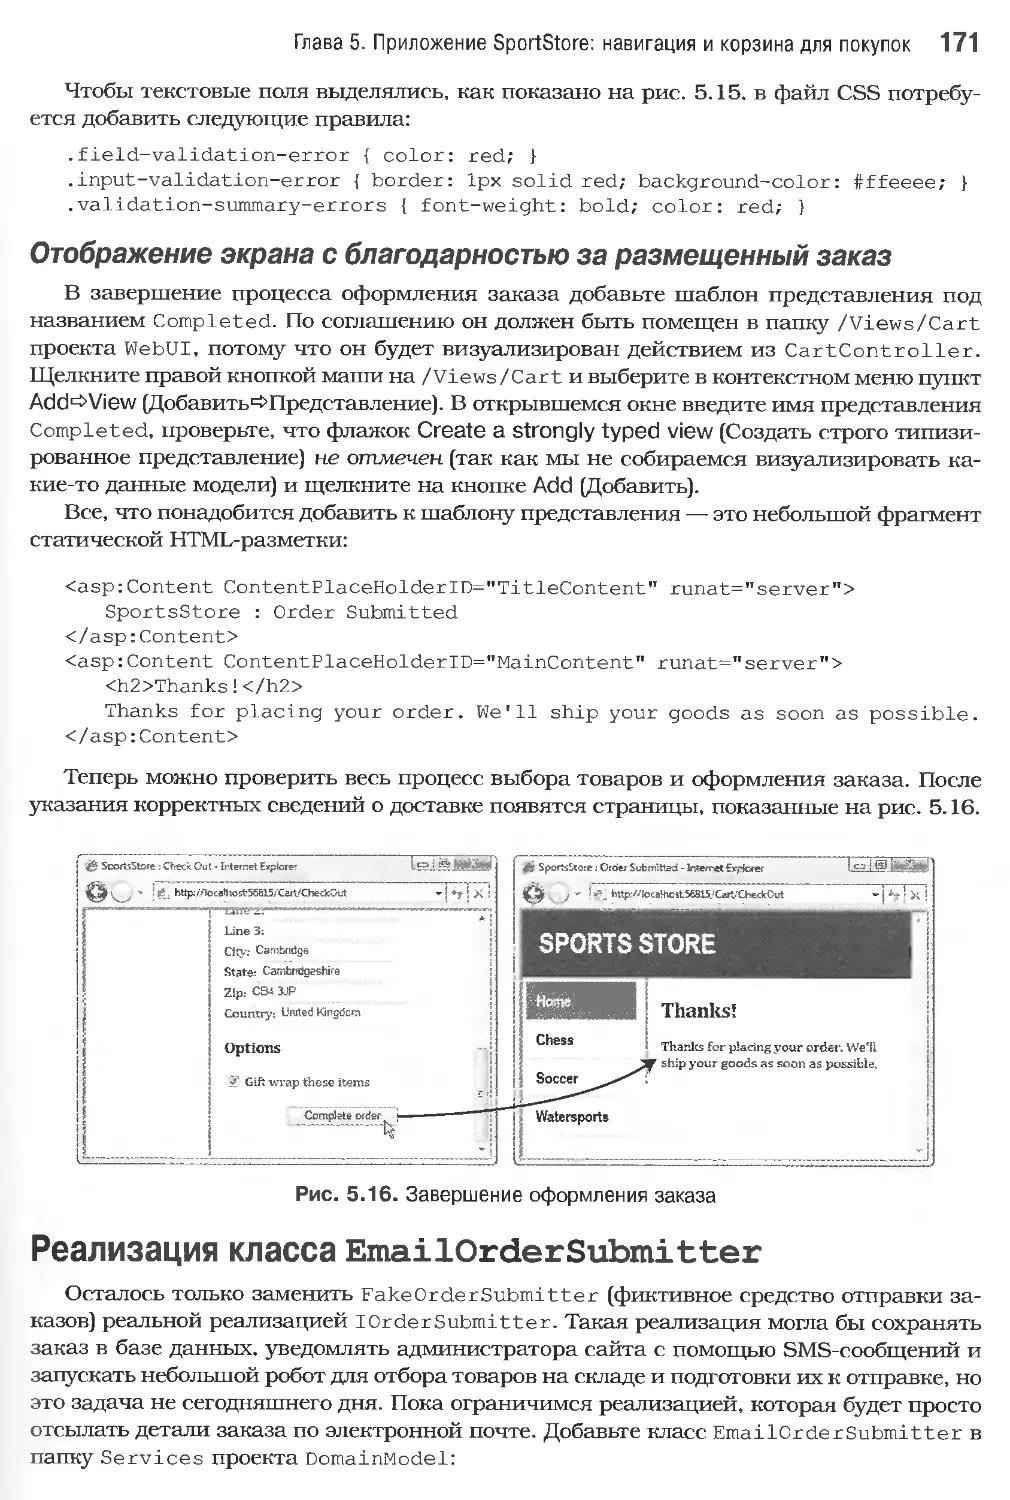 Реализация класса EmailOrderSubmitter